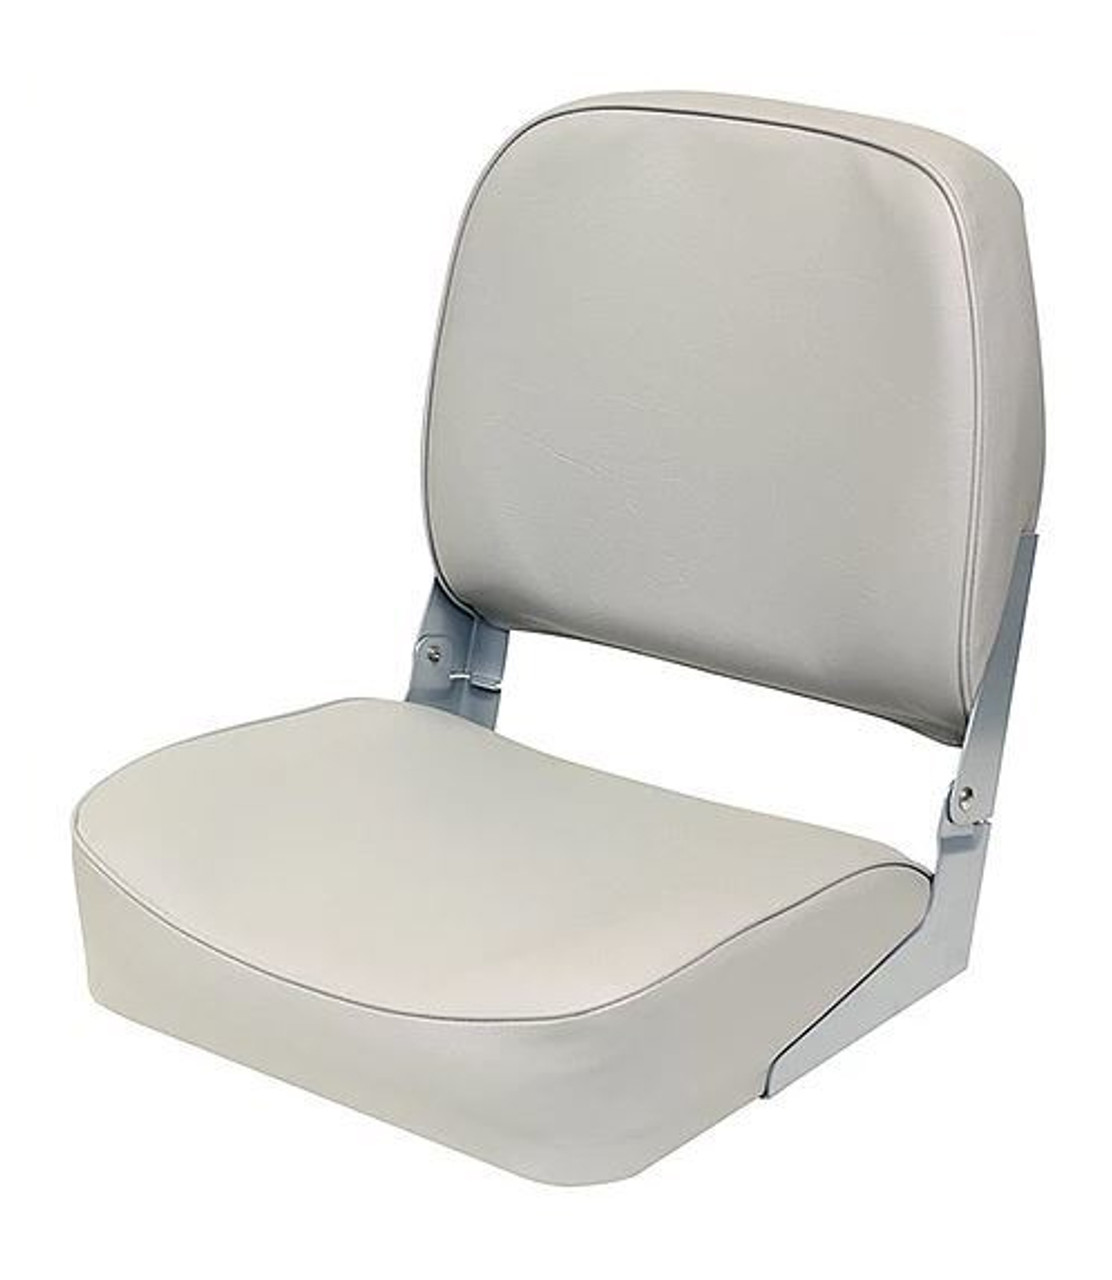 https://cdn11.bigcommerce.com/s-uprkx/images/stencil/1280x1280/products/58258/283741/wise-folding-boat-seat-3313__77372.1497638611.jpg?c=2